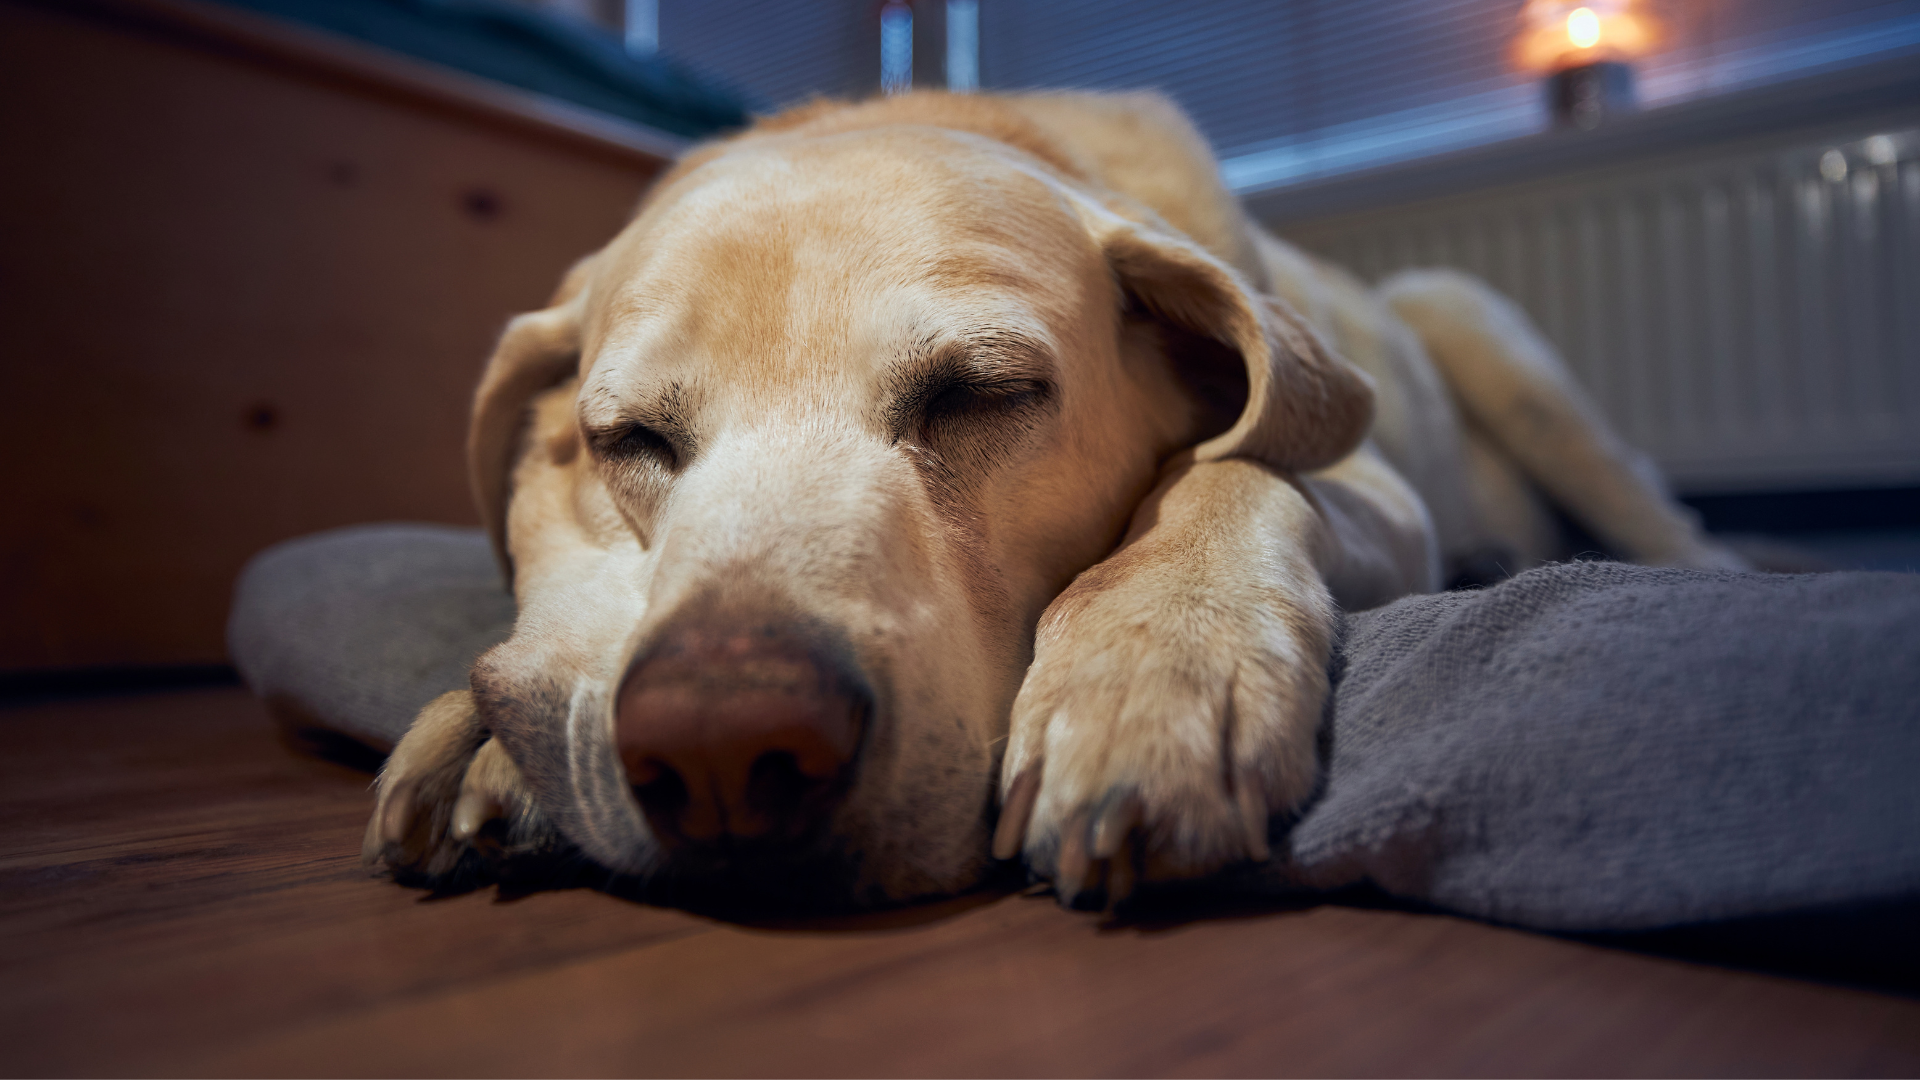 Nighttime Restlessness in Dogs